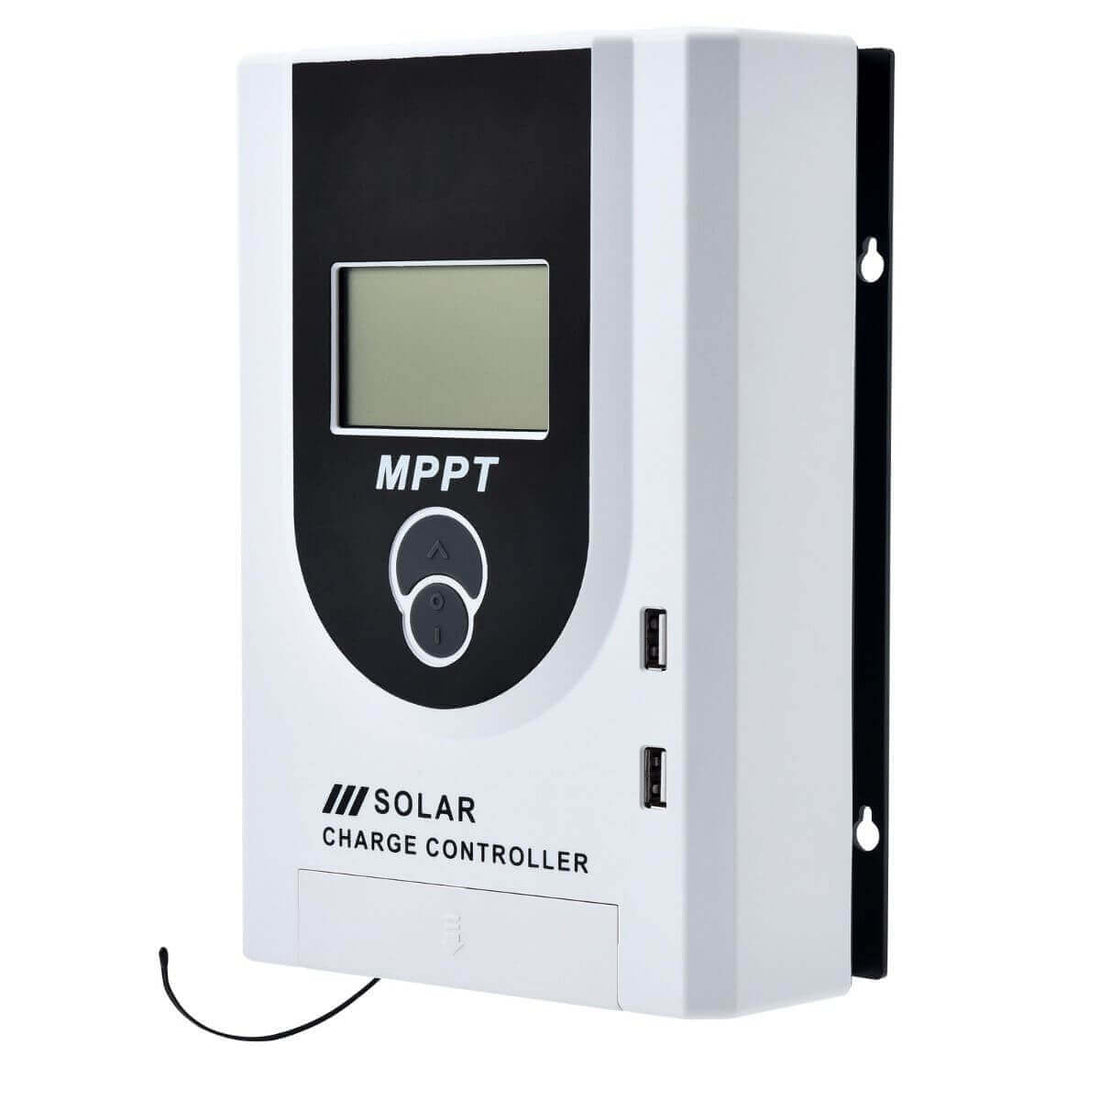 Top 10 Benefits of an MPPT Charge Controller